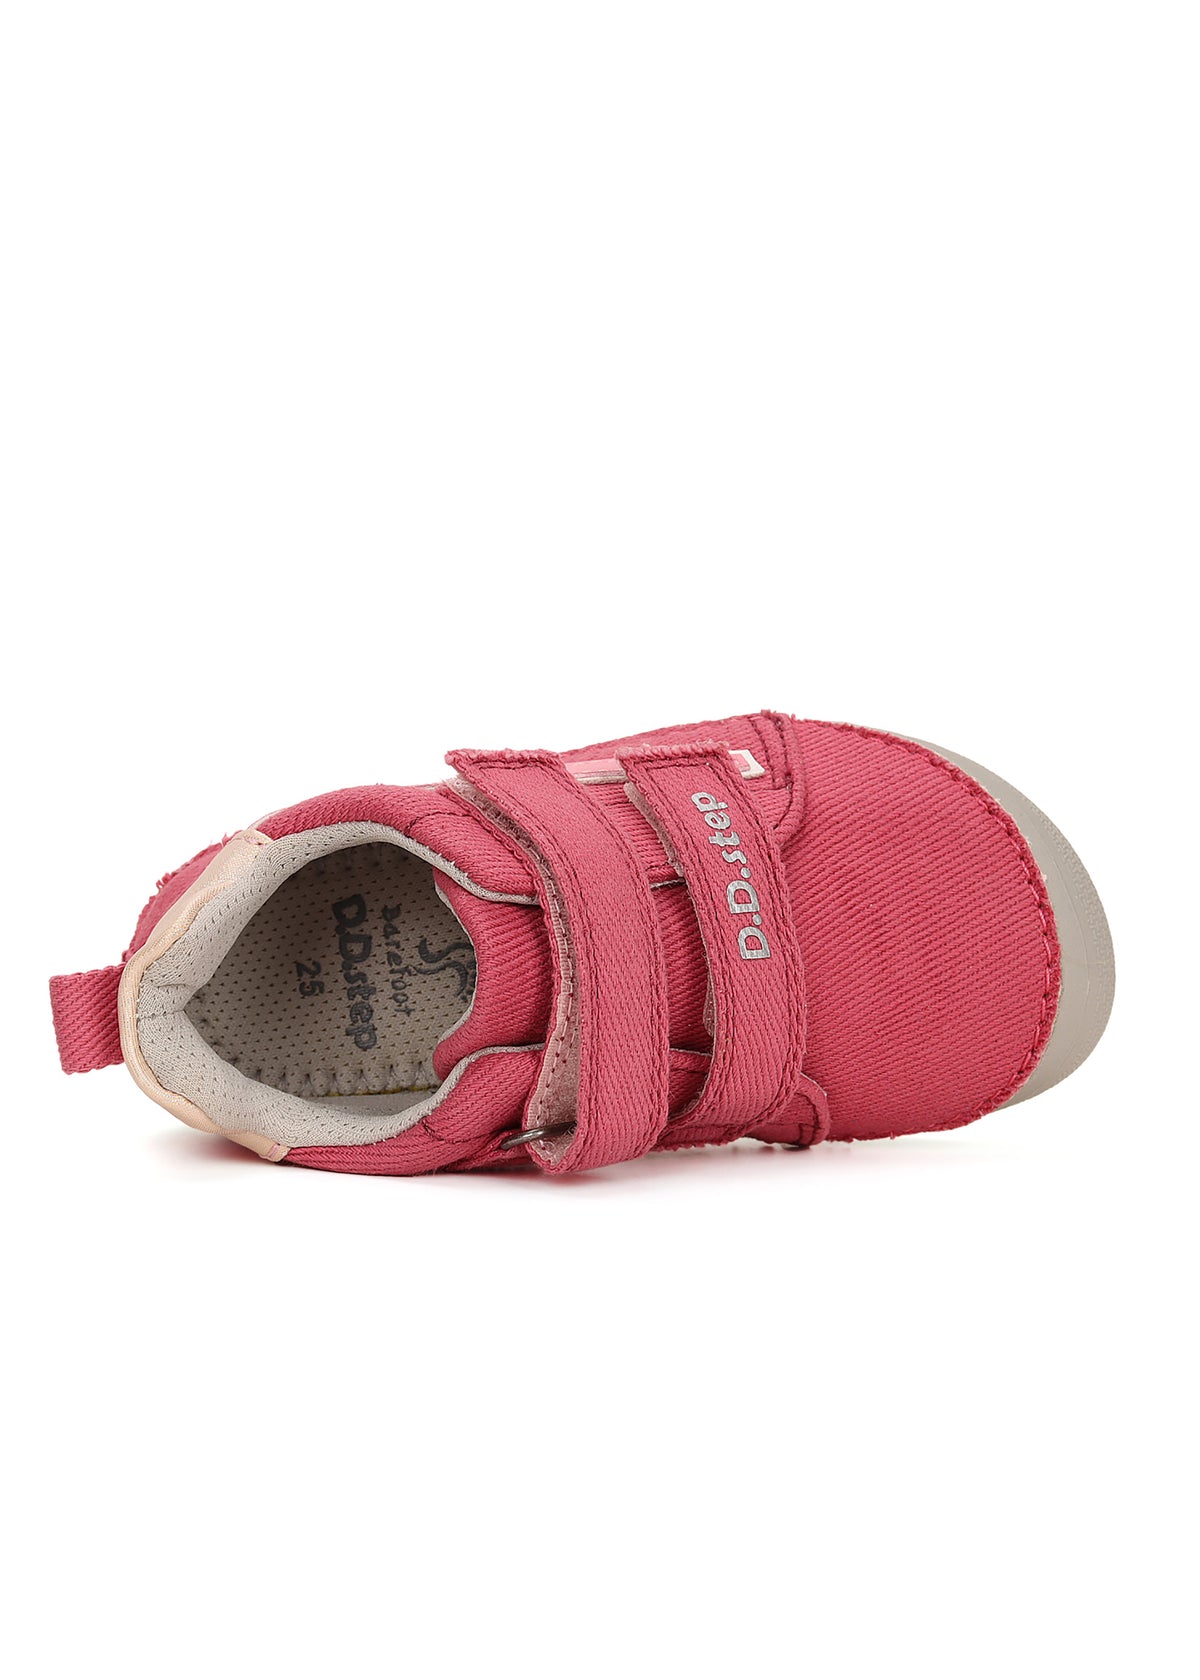 Children's barefoot sneakers - red canvas, pink lightning